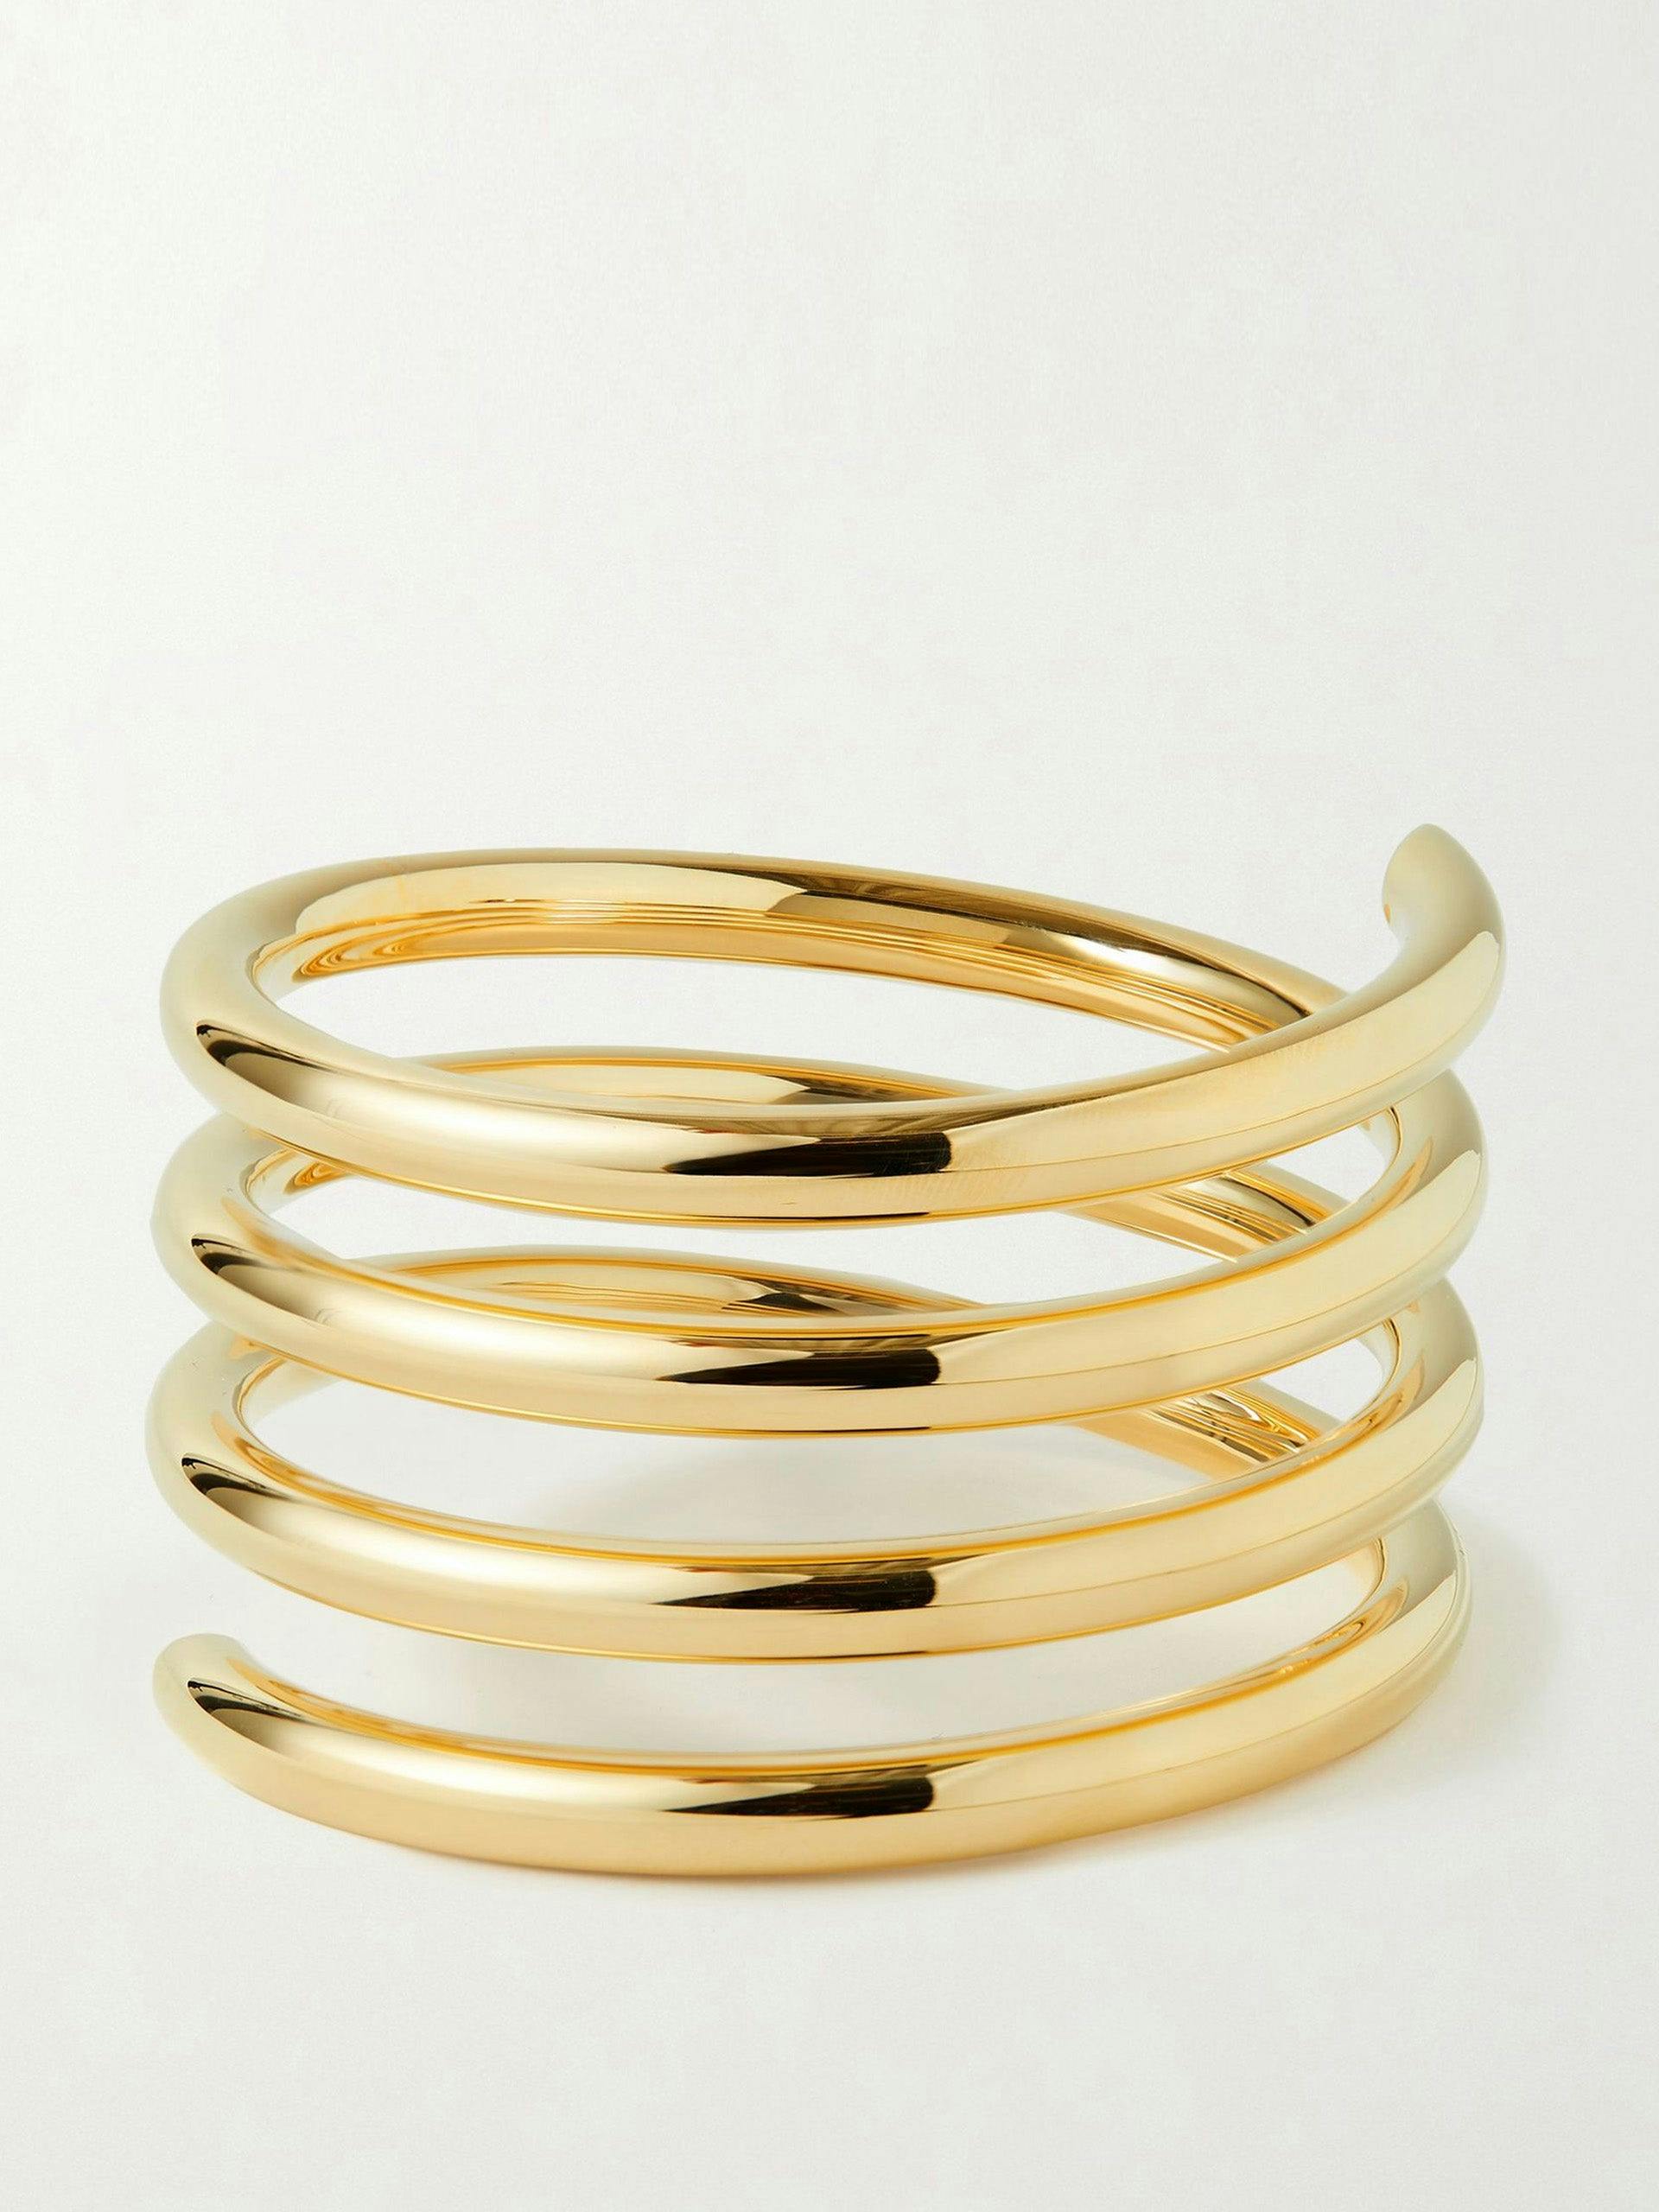 Triple Coil gold-plated bangle